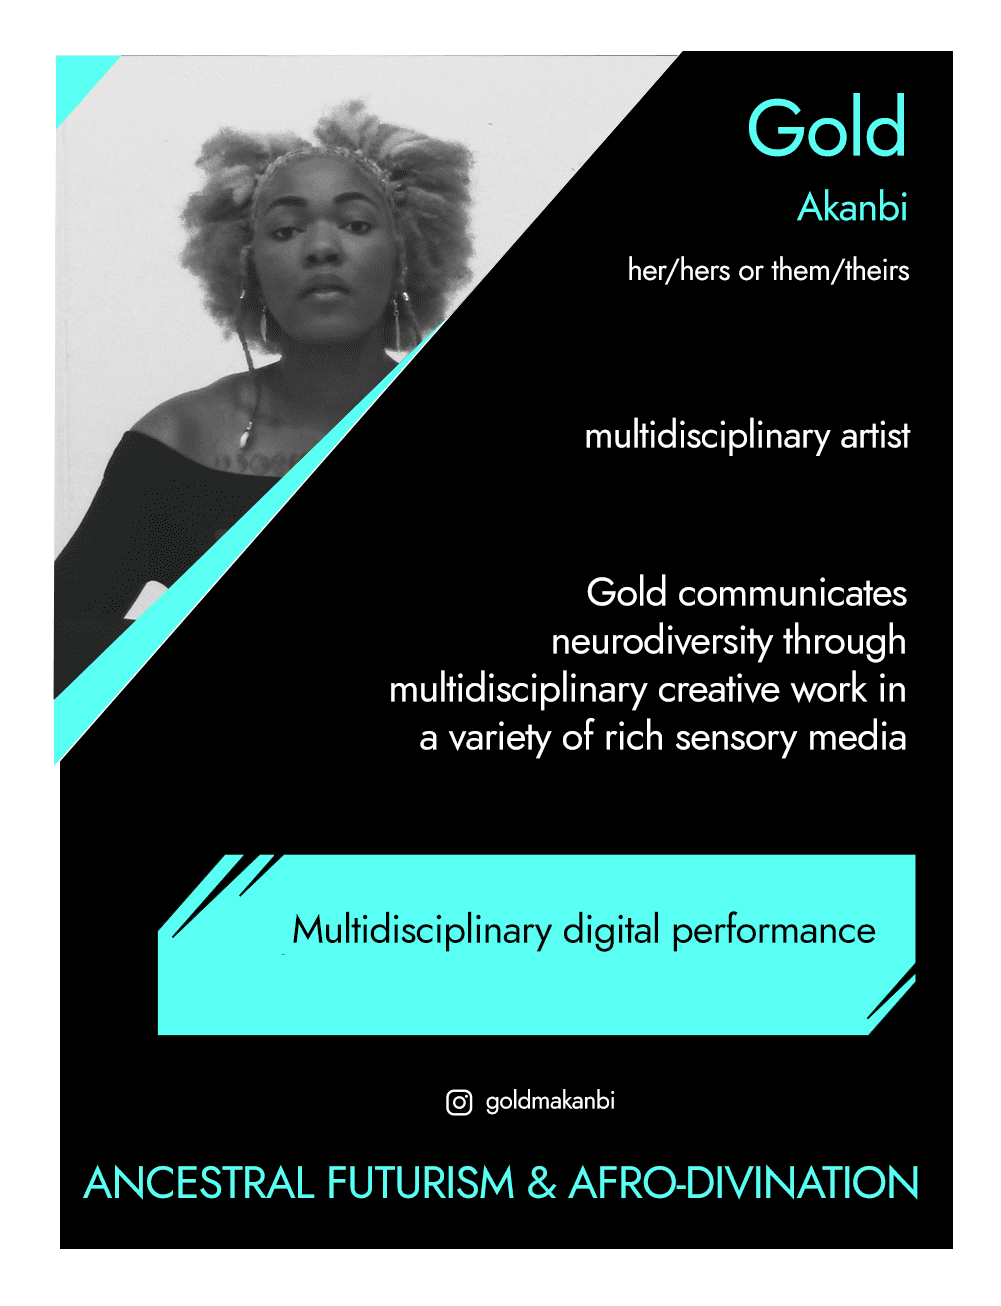 This is the front of an artist announcement card for Gold Akanbi. The design is styled on an American baseball card. The card has a thin white border and the rest of the card is black with turquoise accents. On the left hand corner, there is a triangular cross section of a photo of Gold. Gold is sitting at a desk with a pained expression on their face, wearing a black top and has a brown afro. To the right of the photo, there is their name, Gold Akanbi, pronouns, her/hers or them/theirs, and a their field - multidisciplinary artists. Below this is a short paragraph which says "Gold communicates neurodiversity through multidisciplinary creative work in a variety of rich sensory media". In a turquoise rectangle below this, the card says "Multidisciplinary digital performance". Below this is Gold's instagram handle, @goldmakanbi and a quote saying "Ancestral futurism and afro-divination"